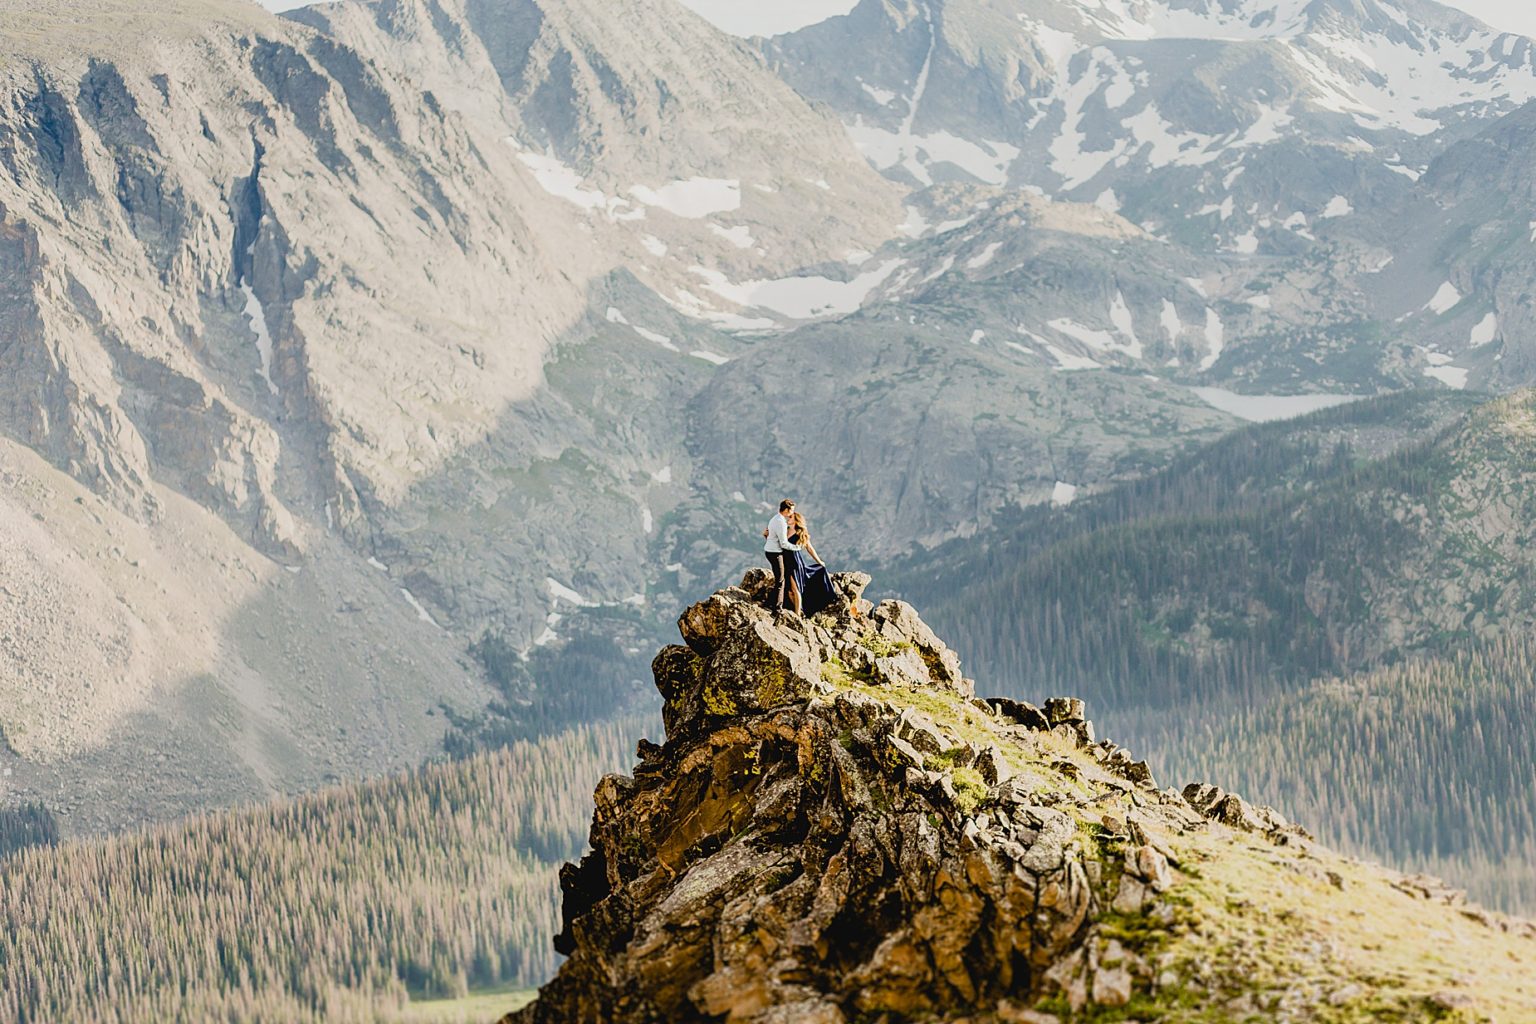 couple embraces on Rocky Mountain cliff edge with gorgeous mountain scenery in the background